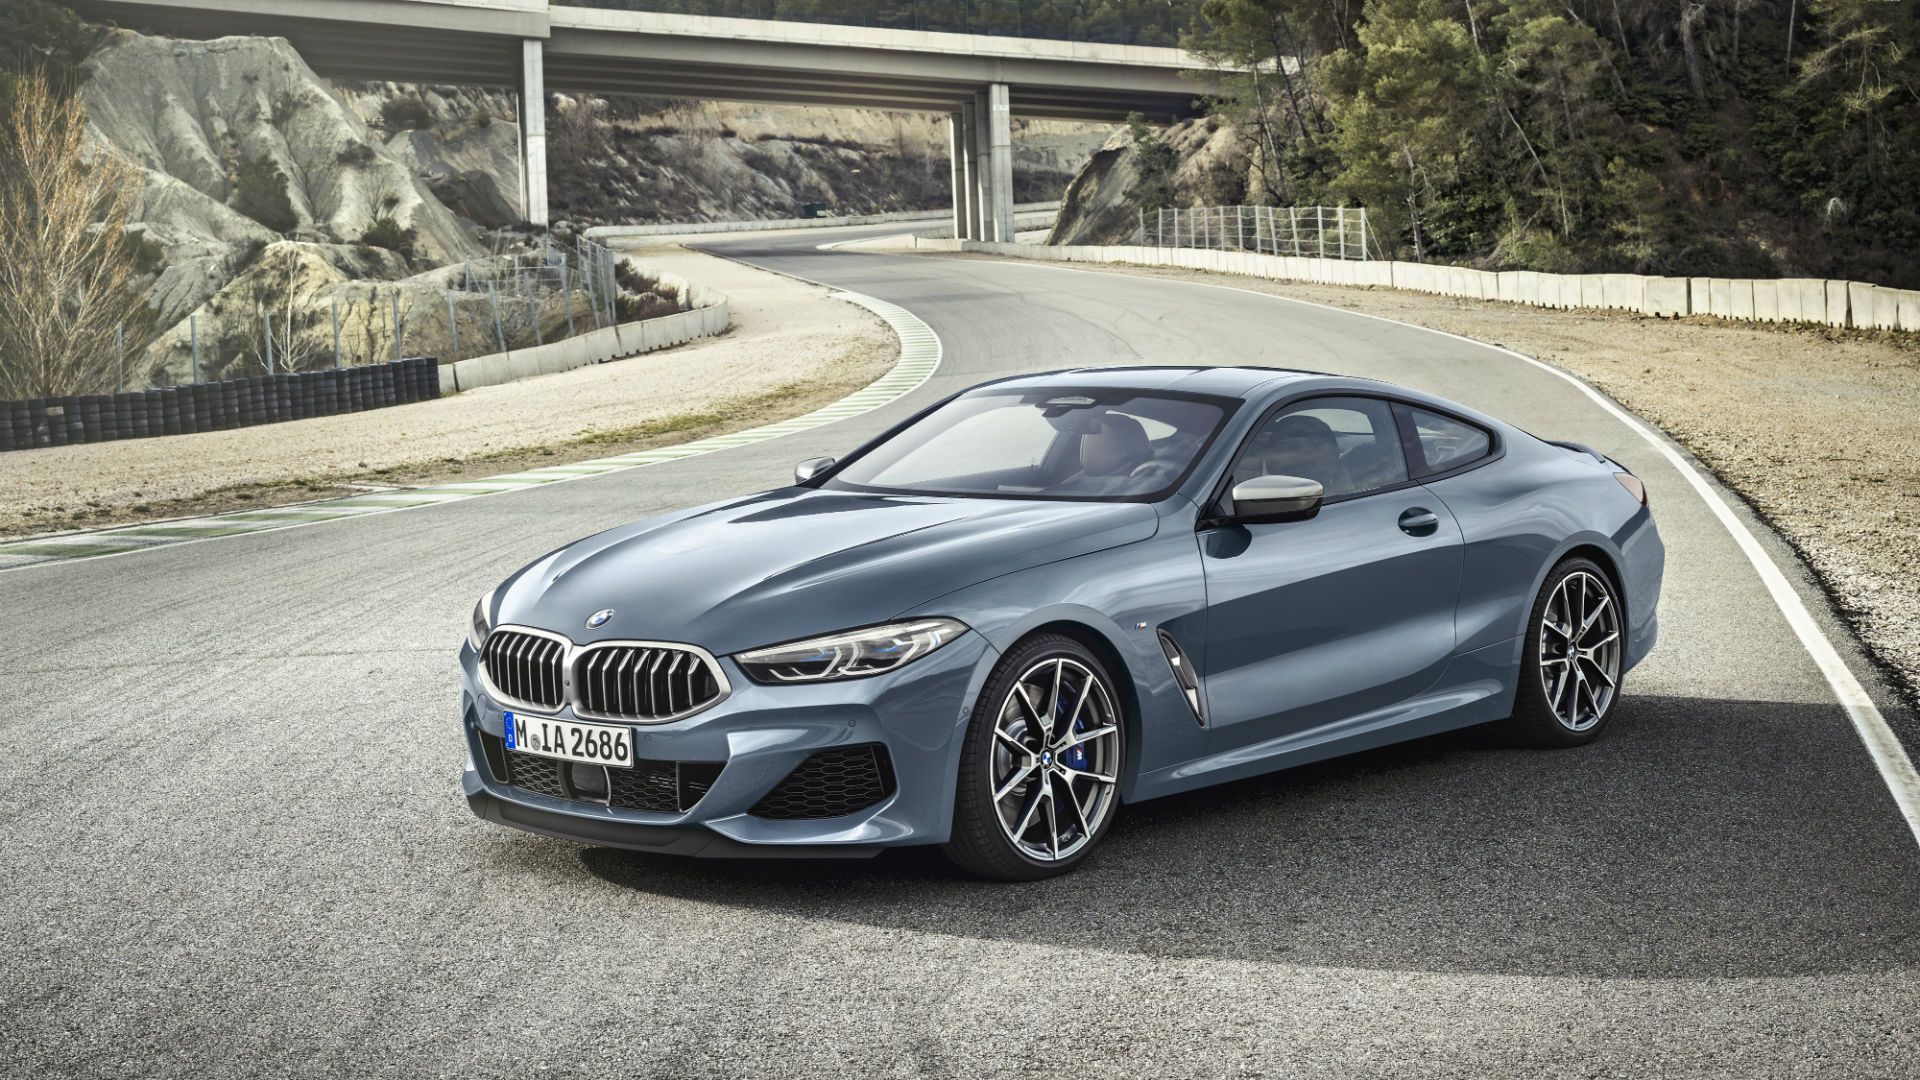 The BMW 8 Series Coupe makes its grand return to the global stage